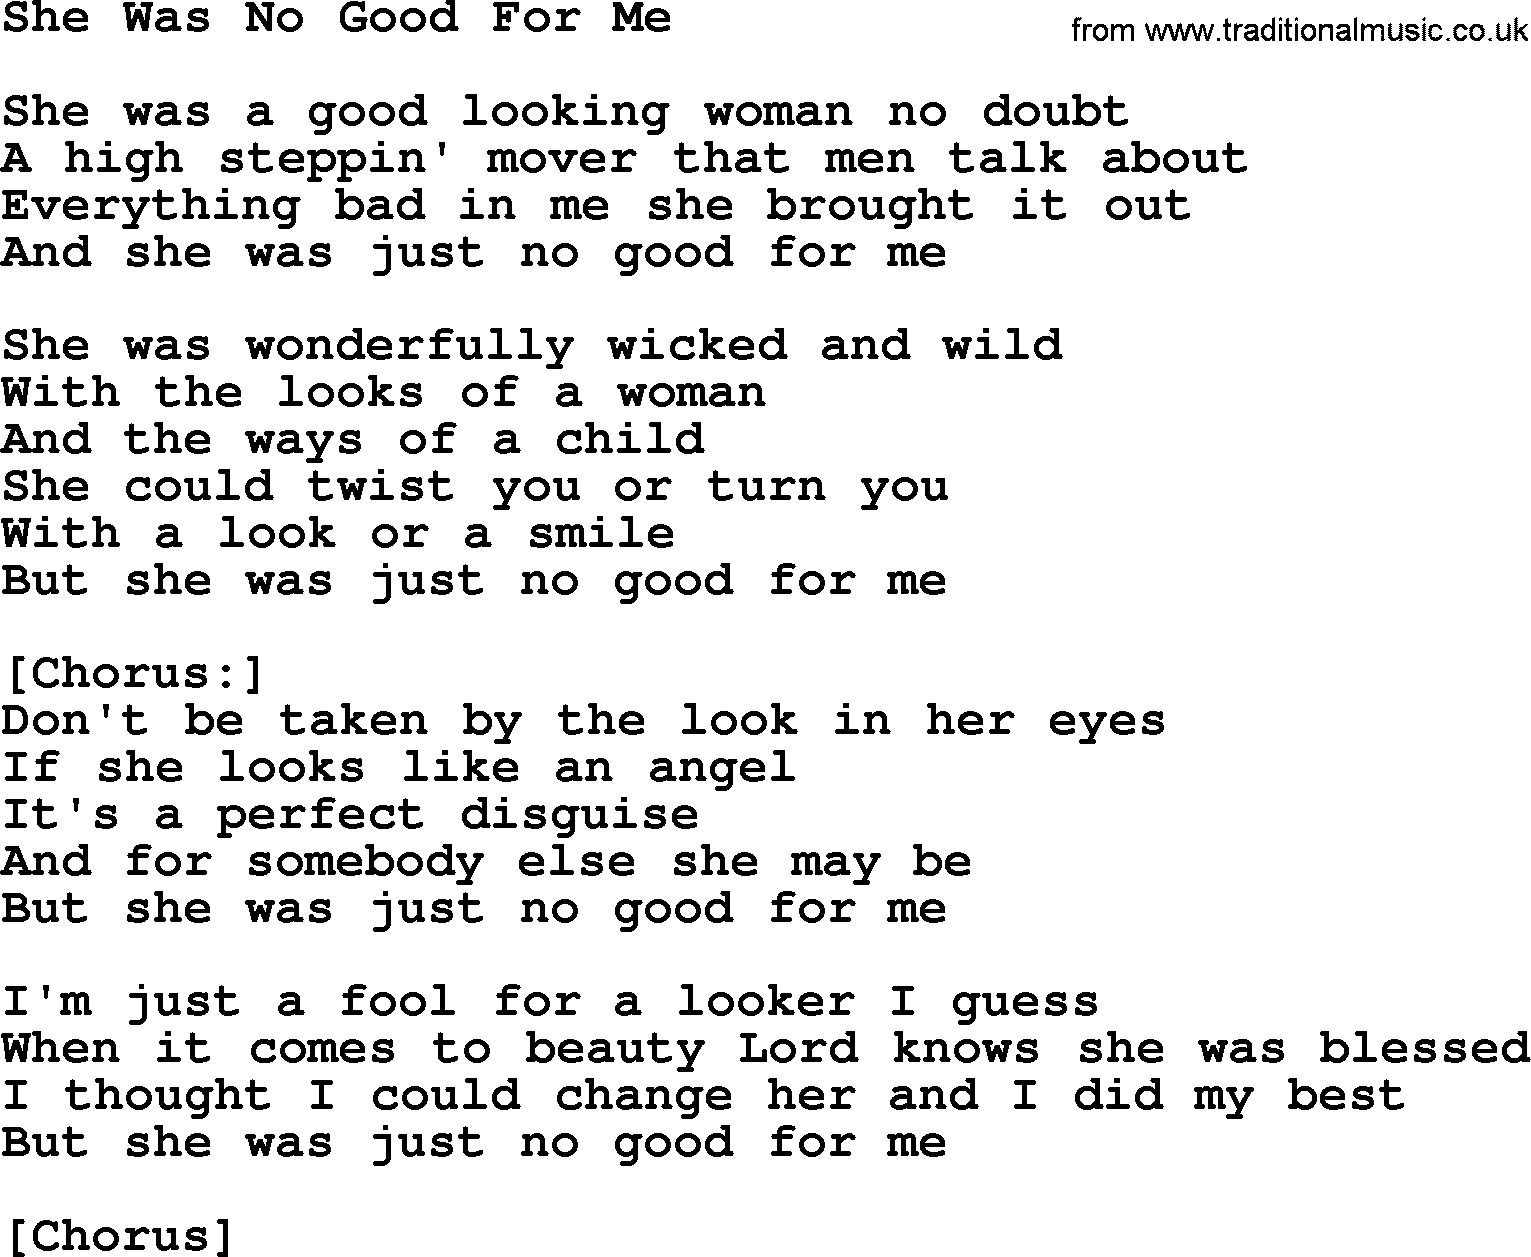 Willie Nelson song: She Was No Good For Me lyrics